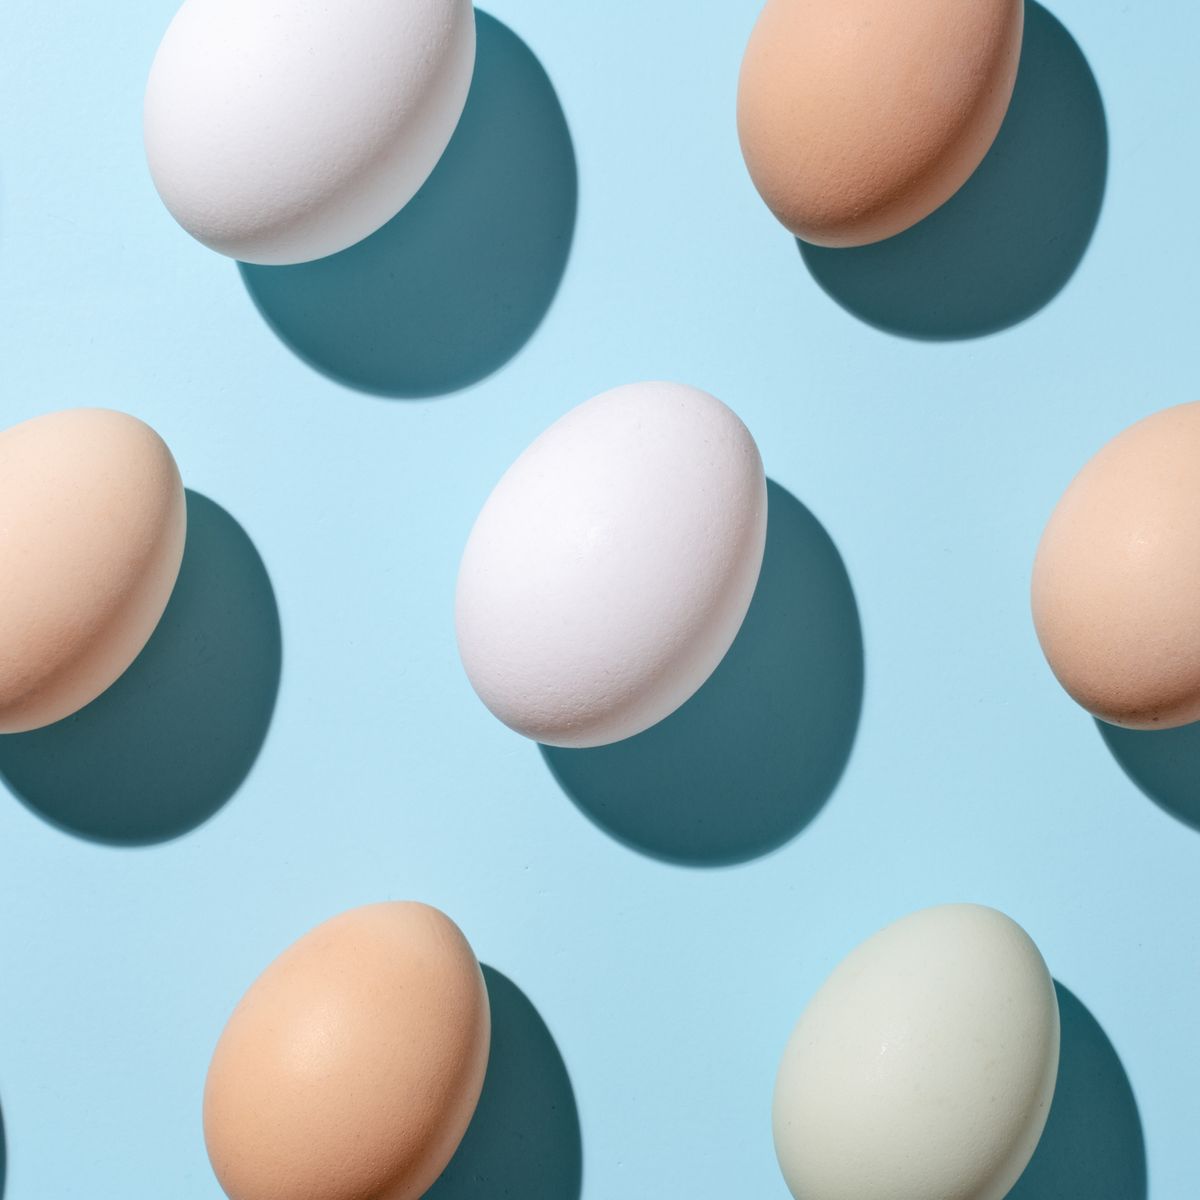 How To Tell If an Egg Is Bad  Food Network Healthy Eats: Recipes